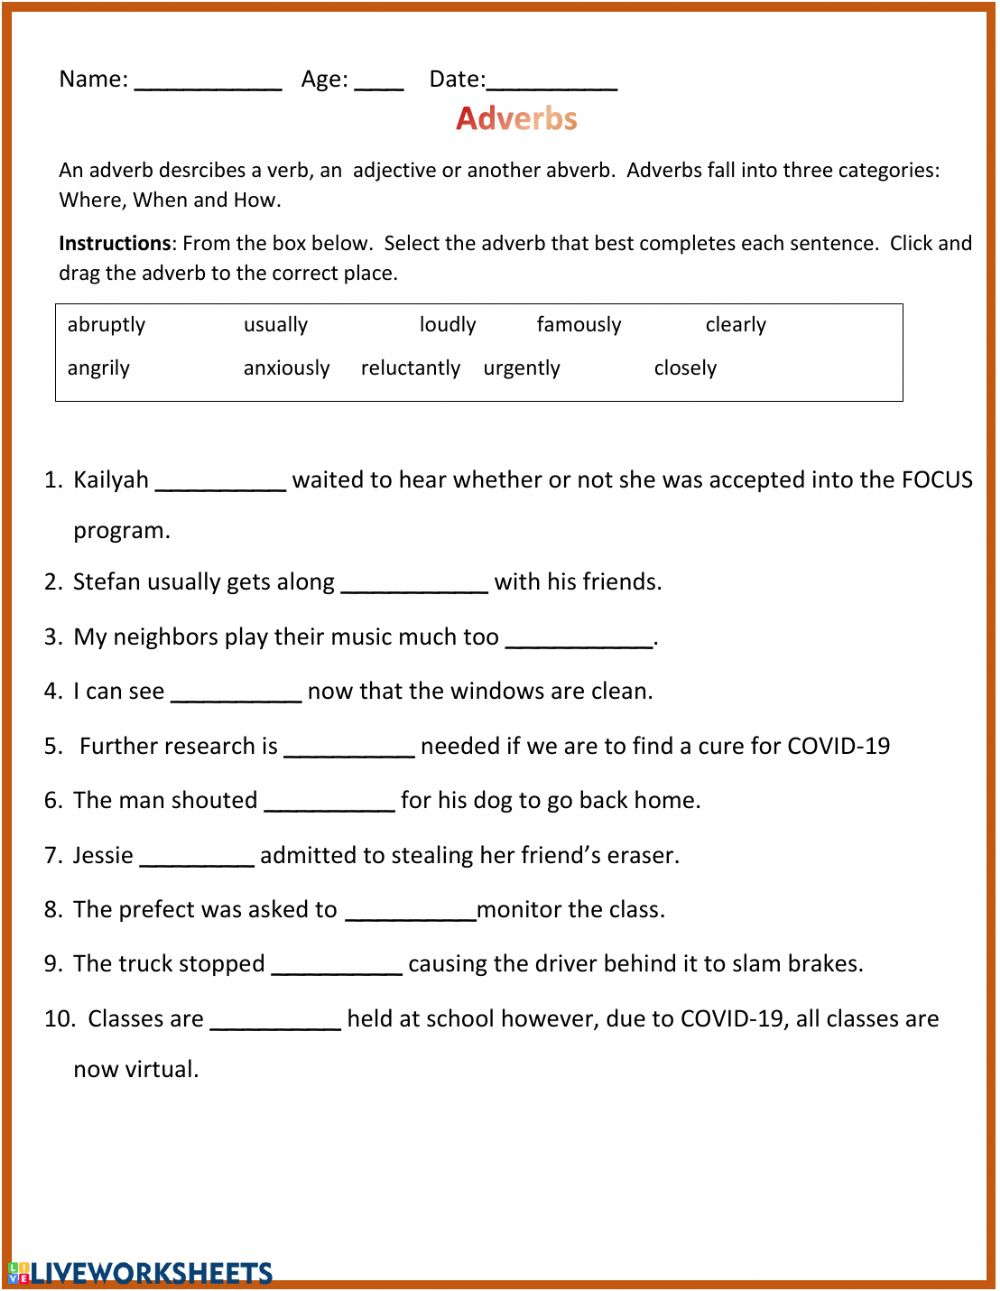 Adverbs Worksheets For Grade 6 With Answers